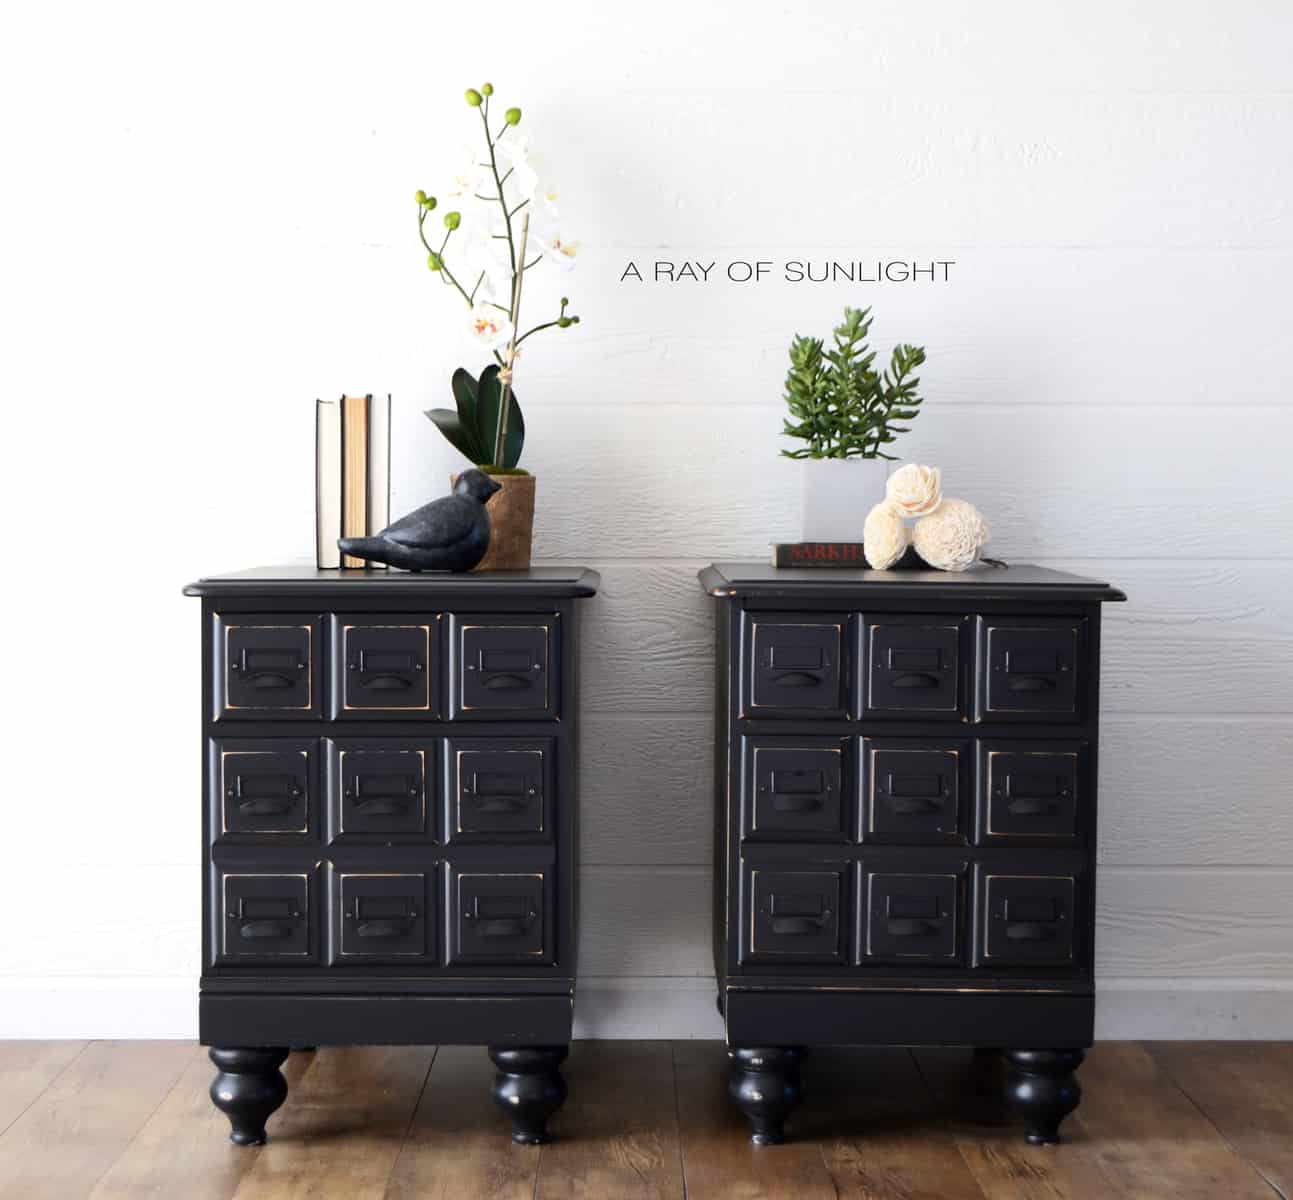 Apothecary Style Nightstands #DIY #furniturepaint #paintedfurniture #homedecor #black #apothecary #nighstand #bedroom #countrychicpaint - blog.countrychicpaint.com